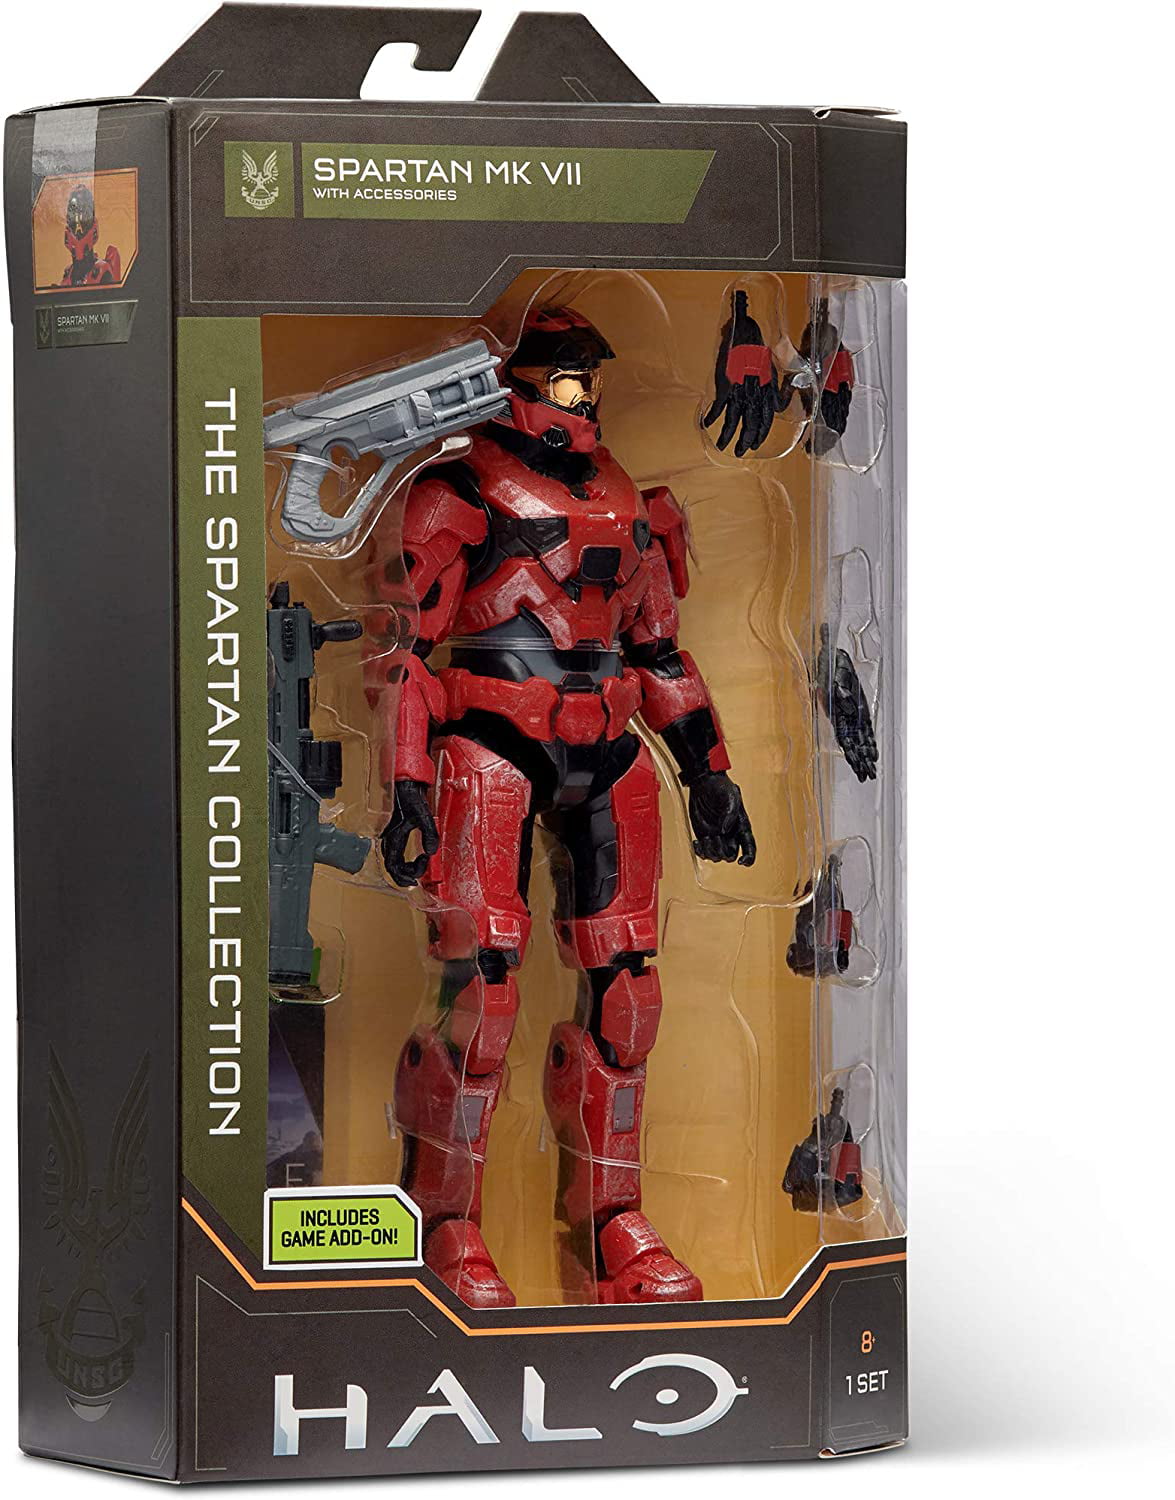 Halo The Spartan Collection MK VII Mark 7 Game Add-on Jazwares in Hand for sale online 